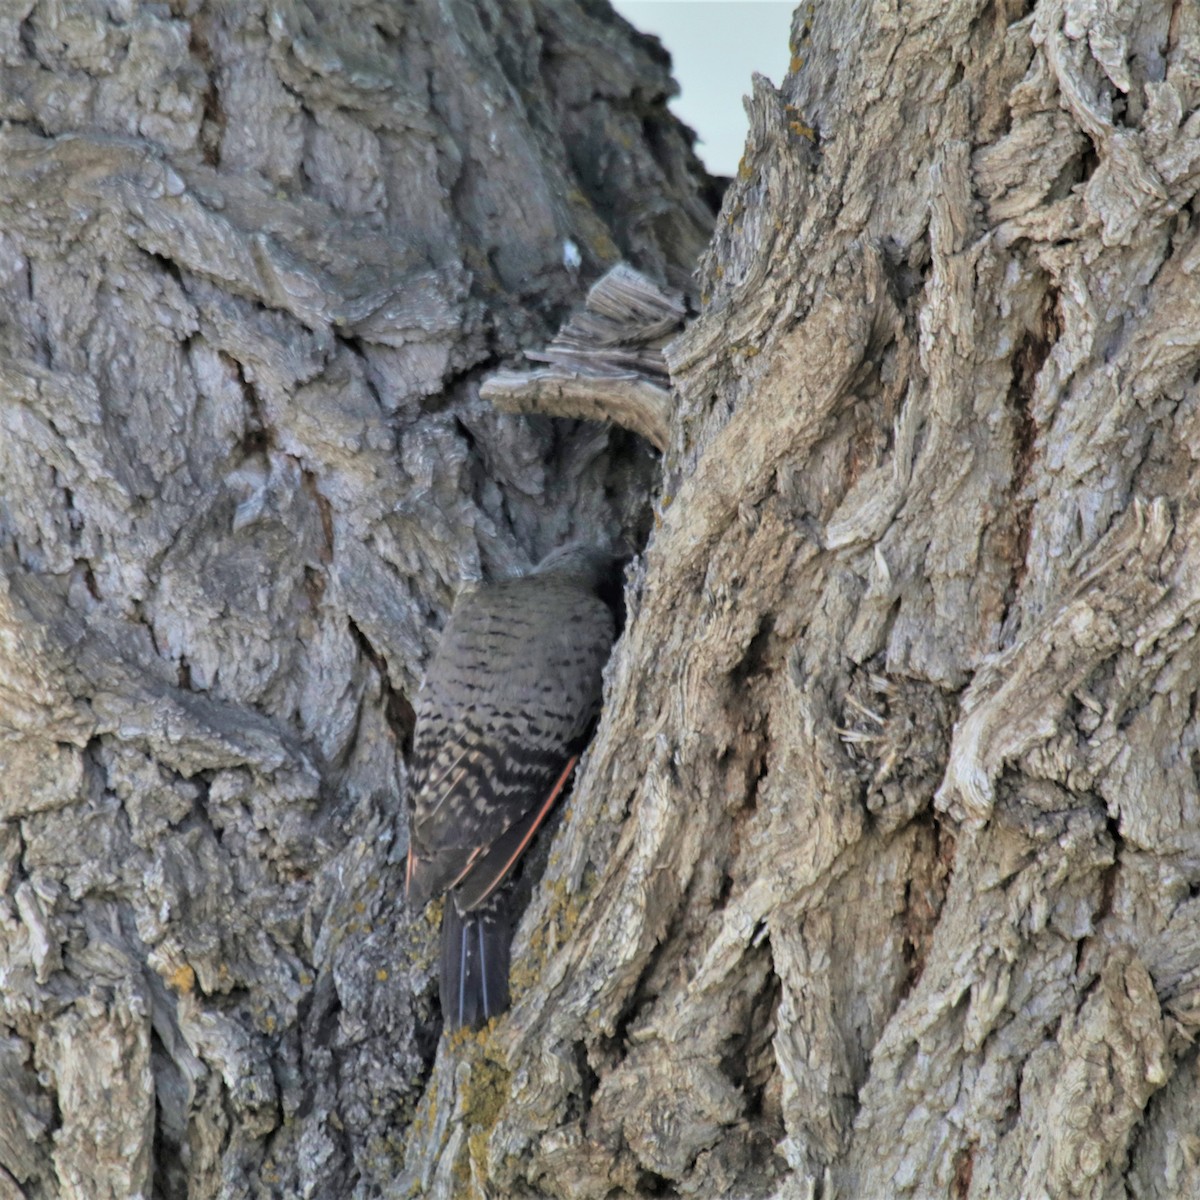 Northern Flicker (Red-shafted) - Doug Kibbe